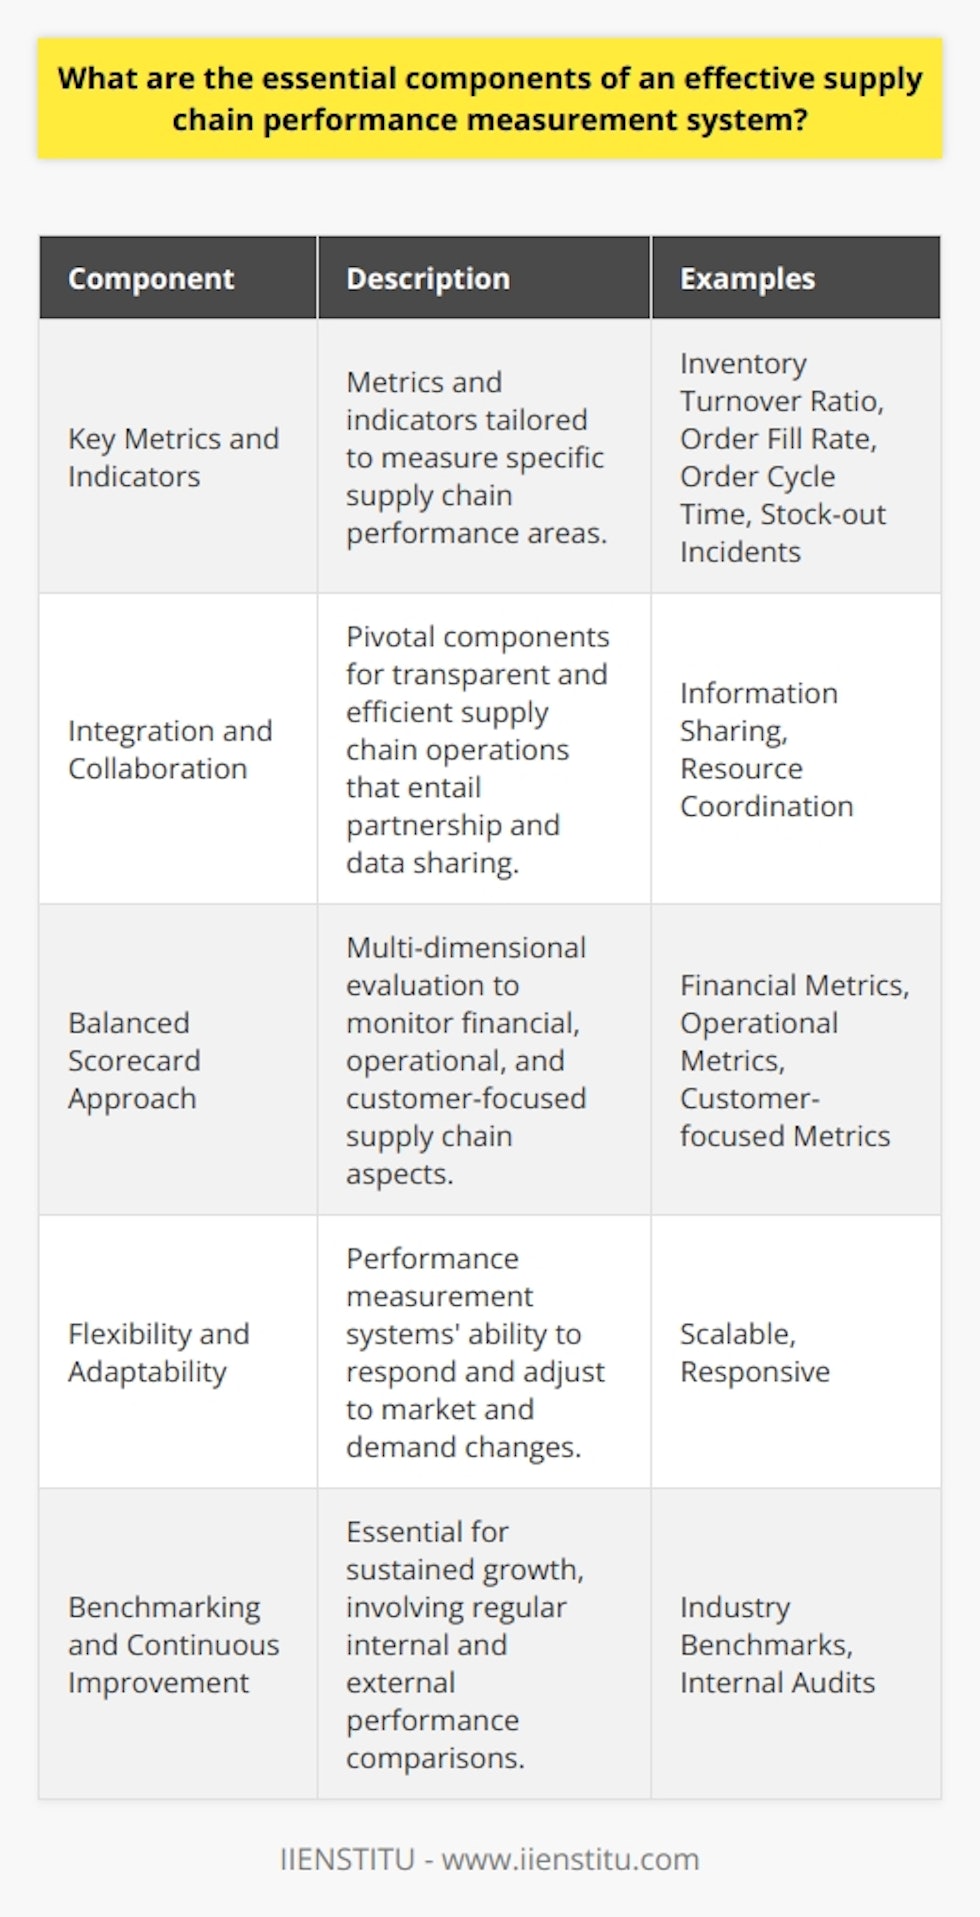 An effective supply chain performance measurement system is critical for any business seeking to optimize the efficiency and responsiveness of its supply chain operations. This system allows businesses to track progress, identify inefficiencies, and implement strategic improvements to meet customer demands and adapt to market dynamics. Below, we explore the essential components that constitute such a system.**Key Metrics and Indicators**To accurately measure supply chain performance, various metrics and indicators are utilized, each tailored to specific areas of the supply chain. These metrics cover diverse aspects such as:- **Inventory Turnover Ratio**: This indicates how often inventory is sold and replaced over a period, helping assess product demand and inventory management efficiency.- **Order Fill Rate**: This measures the percentage of customer orders fulfilled on the first shipment, highlighting the effectiveness of inventory levels and predicting customer satisfaction.- **Order Cycle Time**: By tracking the time taken from the point an order is placed to the moment it is delivered, businesses can assess their order processing efficiency.- **Stock-out Incidents**: The frequency of stock-outs is a critical measure of inventory management and forecasting accuracy. It reflects the ability of a supply chain to meet customer demand without excess inventory holding.**Integration and Collaboration**Strong integration and collaboration across the supply chain are pivotal for transparent and efficient operations. This encompasses:- **Information Sharing**: Partners share real-time data and insights, fostering a reactive and resilient supply chain to shifts in demand and supply disruptions.- **Resource Coordination**: By pooling resources and expertise, supply chain entities can achieve cost savings and improve service quality for end customers.**Balanced Scorecard Approach**A balanced scorecard approach ensures a multi-dimensional evaluation of supply chain performance, which includes:- **Financial Metrics**: Costs, profitability, and investment returns are scrutinized for financial health and sustainability.- **Operational Metrics**: Measures related to production efficiency, labor productivity, and quality are monitored.- **Customer-focused Metrics**: Customer satisfaction, delivery performance, and service quality are evaluated to maintain customer loyalty.**Flexibility and Adaptability**Given the volatility in global markets and consumer trends, performance measurement systems need to be:- **Scalable**: Able to expand or contract in response to business growth or consolidation.- **Responsive**: Quick to incorporate new technologies, methods, or data analytics for enhanced decision-making.**Benchmarking and Continuous Improvement**For sustained growth and competitive advantage, continuous improvement is essential. It involves:- **Industry Benchmarks**: Regular comparisons against industry standards and best practices help identify areas for strategic enhancement.- **Internal Audits**: Continual internal performance reviews ensure that supply chain activities align with corporate objectives and performance targets.By implementing a performance measurement system that taps into these components, businesses can scrutinize their supply chain operations in a comprehensive manner. Metrics and KPIs should be aligned with the strategic goals of the business, ensuring that supply chain performance is geared towards both customer satisfaction and business profitability. The focus should remain on an iterative process of measurement, analysis, and improvement, which is achieved through a flexible, collaborative, and balanced approach.